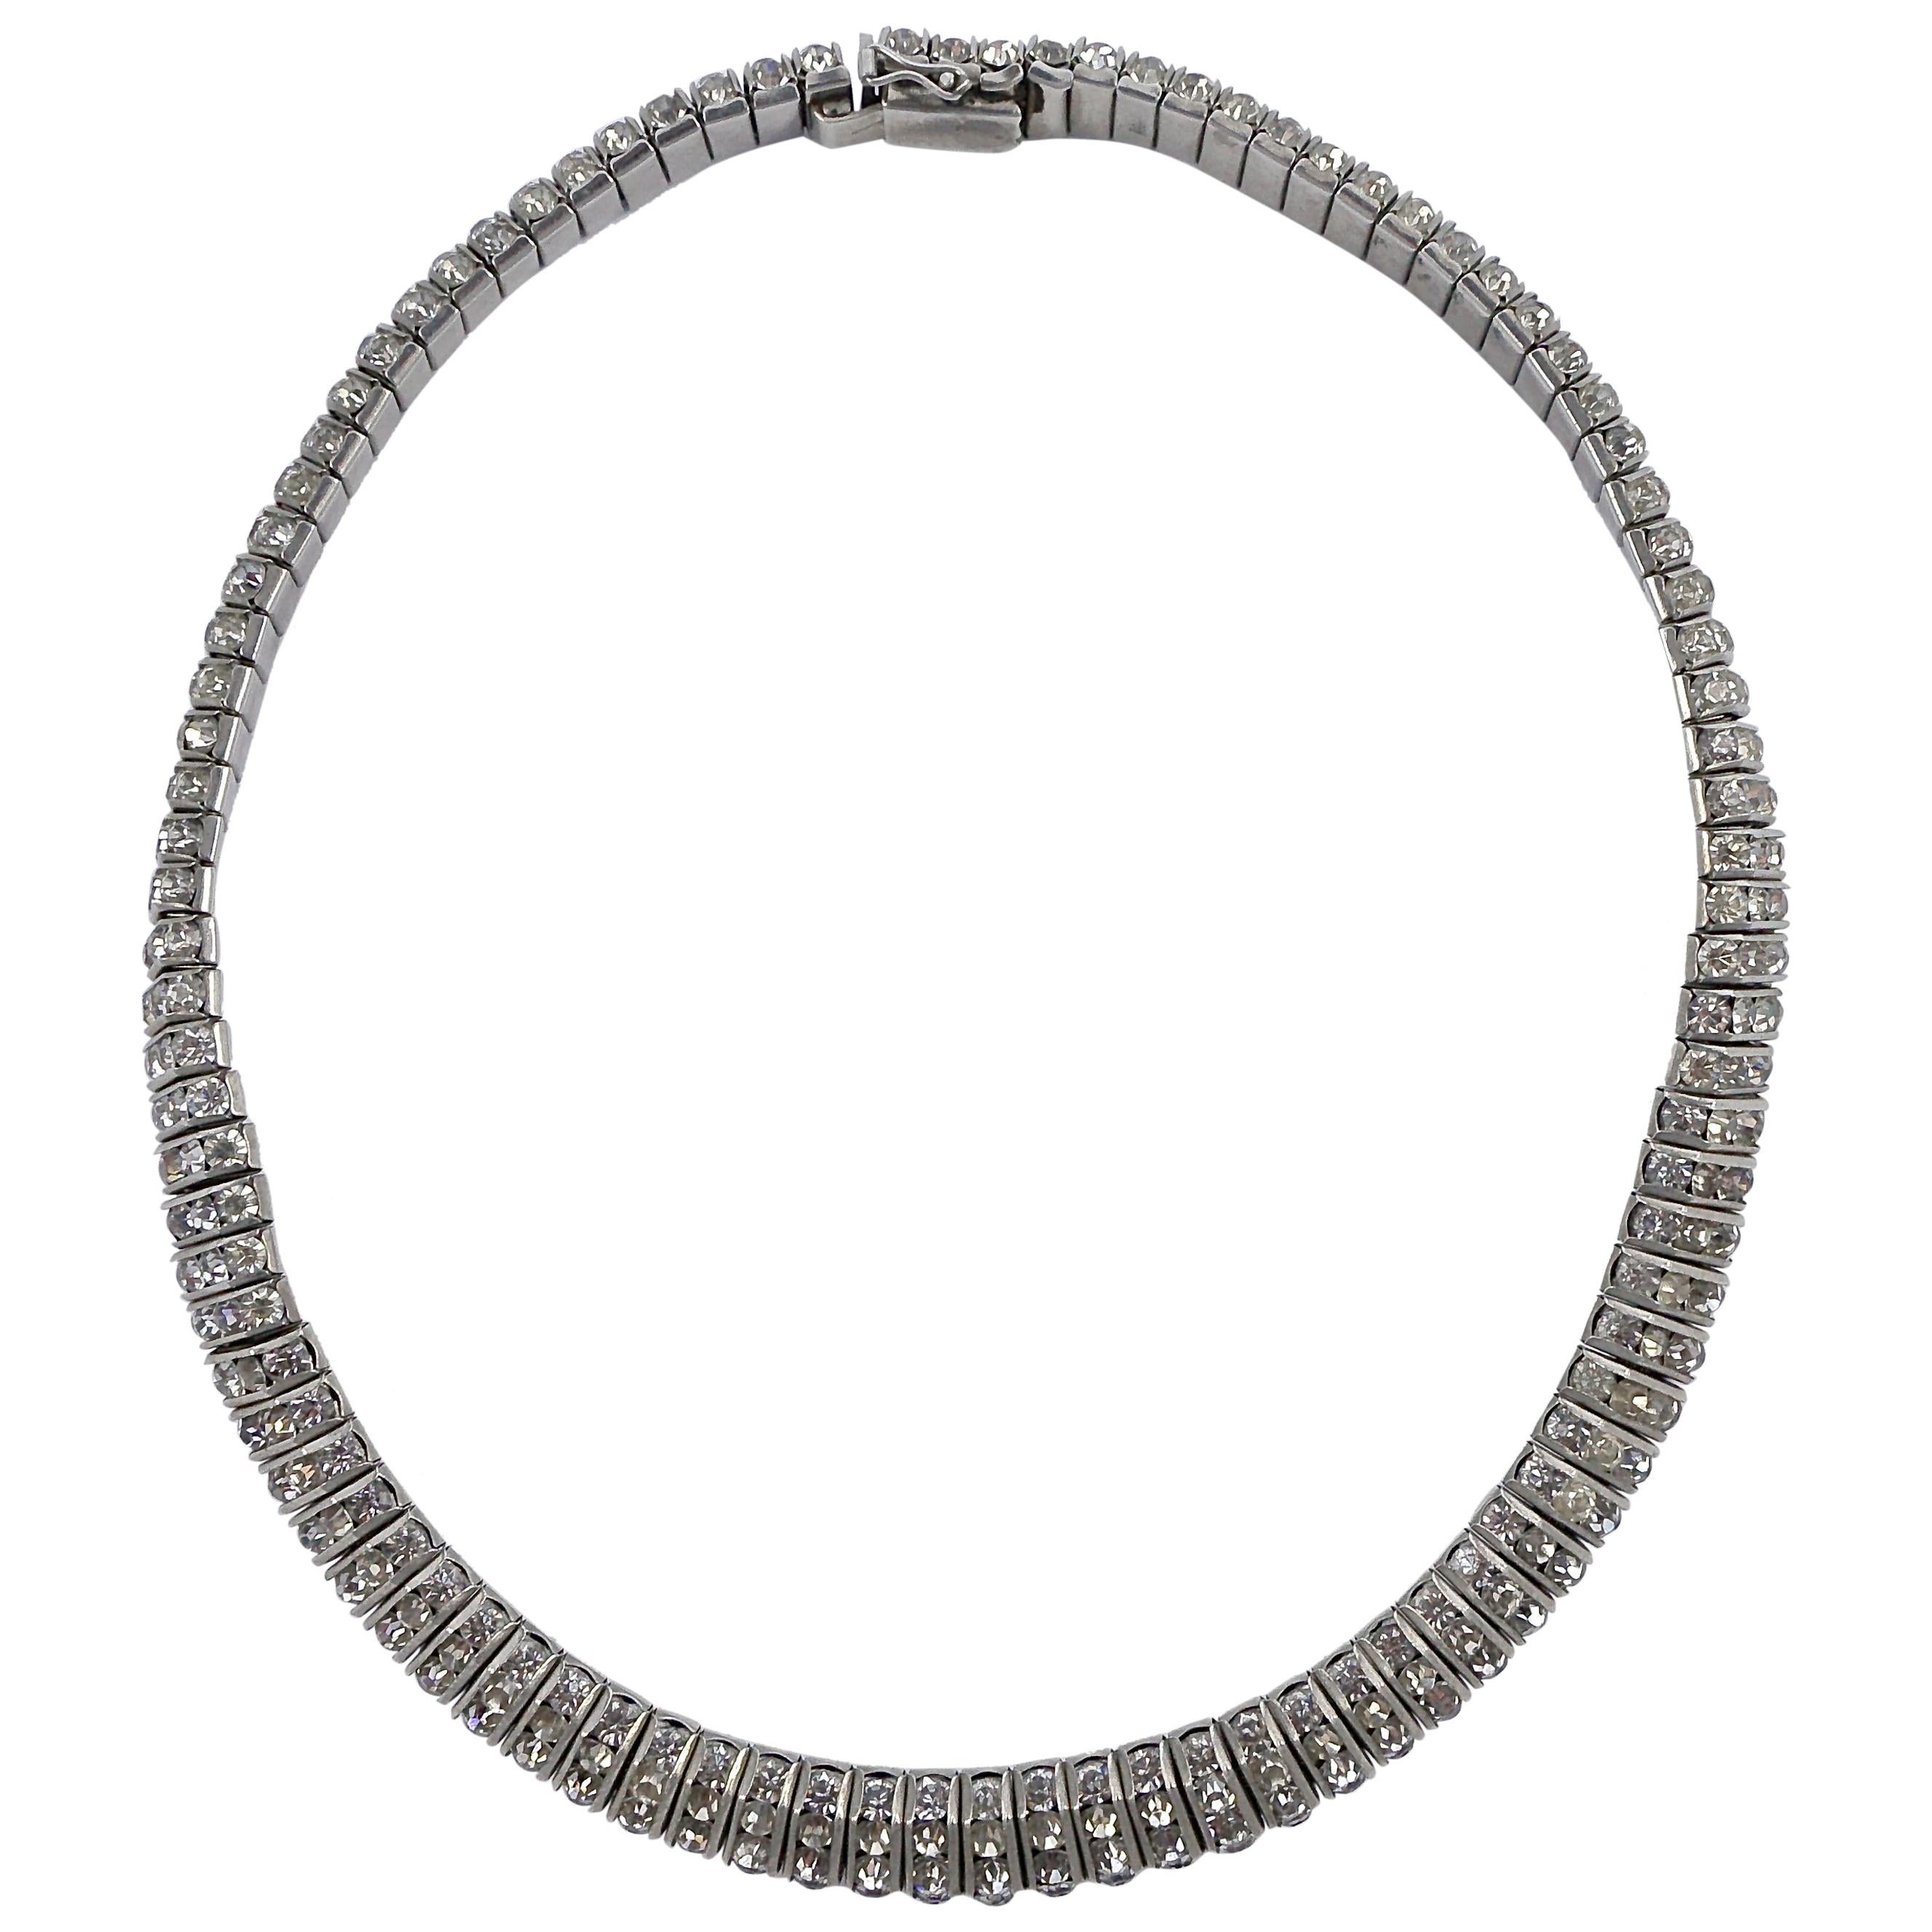 Art Deco DRGM Silver Tone and Channel Set Rhinestone Necklace, 1930s German